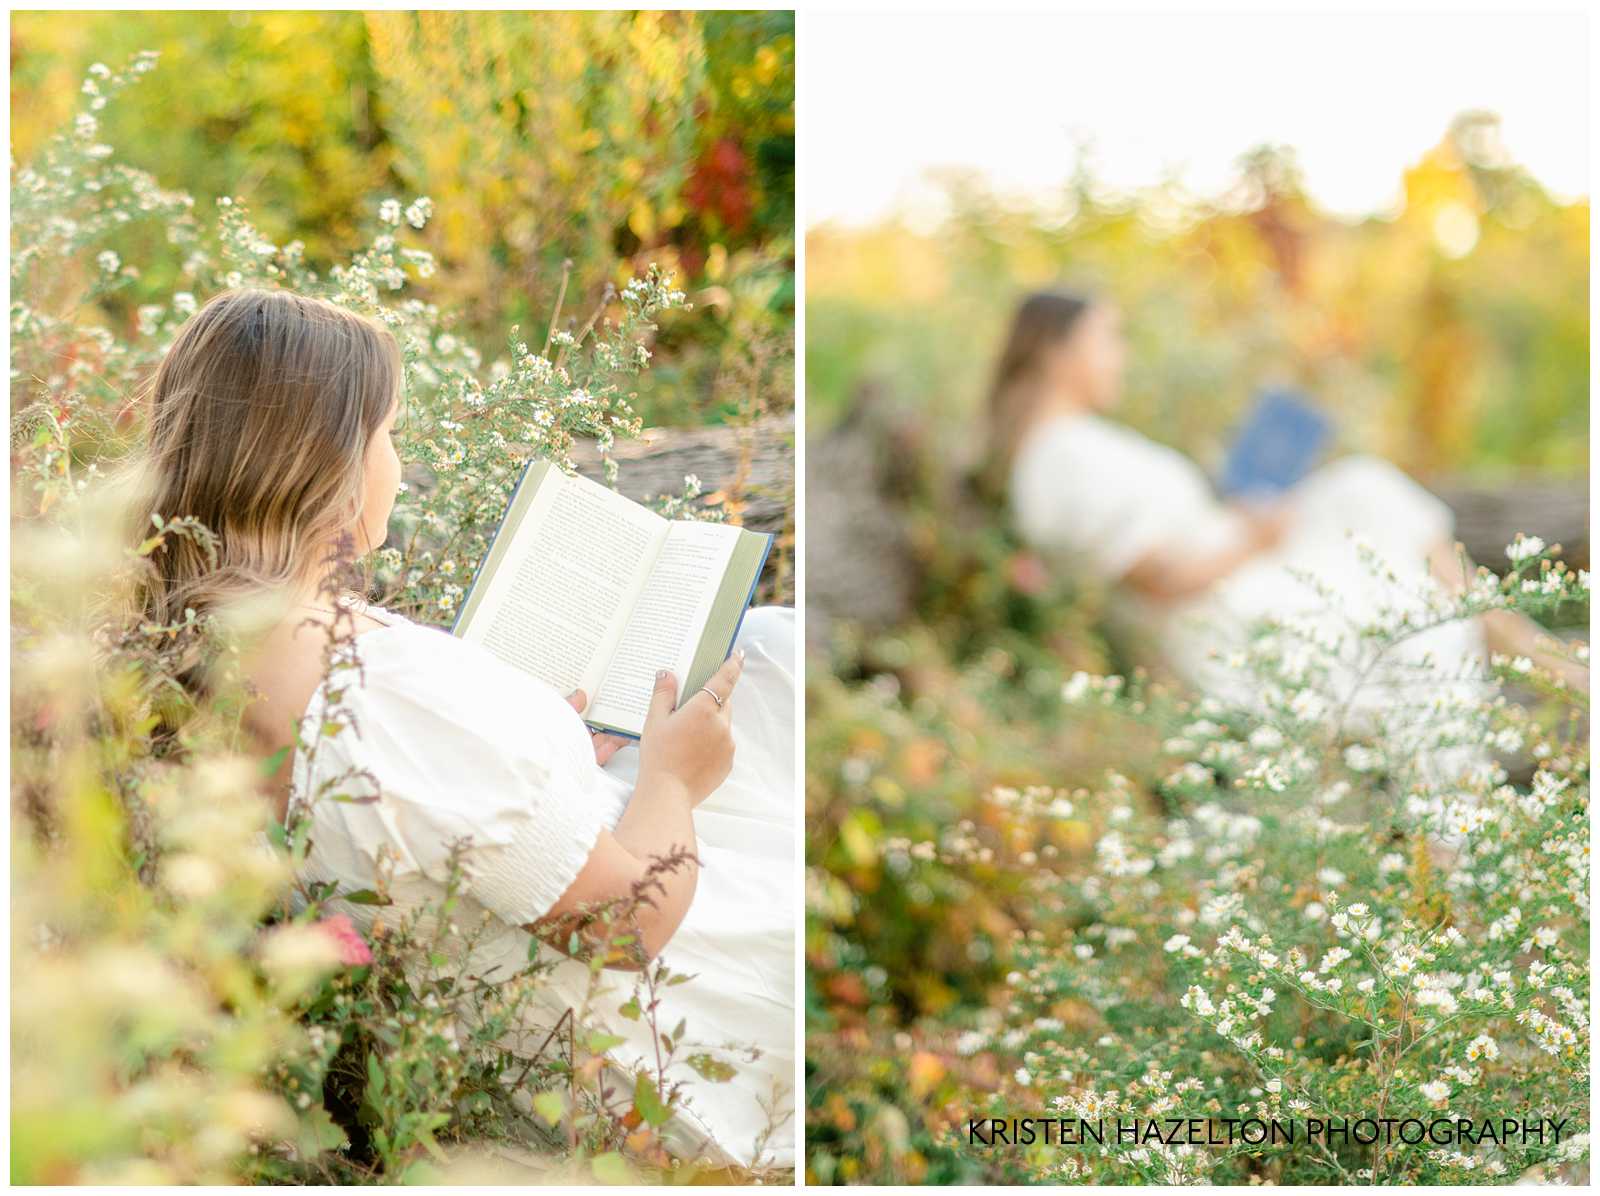 Senior girl in white dress reading a blue book in a field of wildflowers